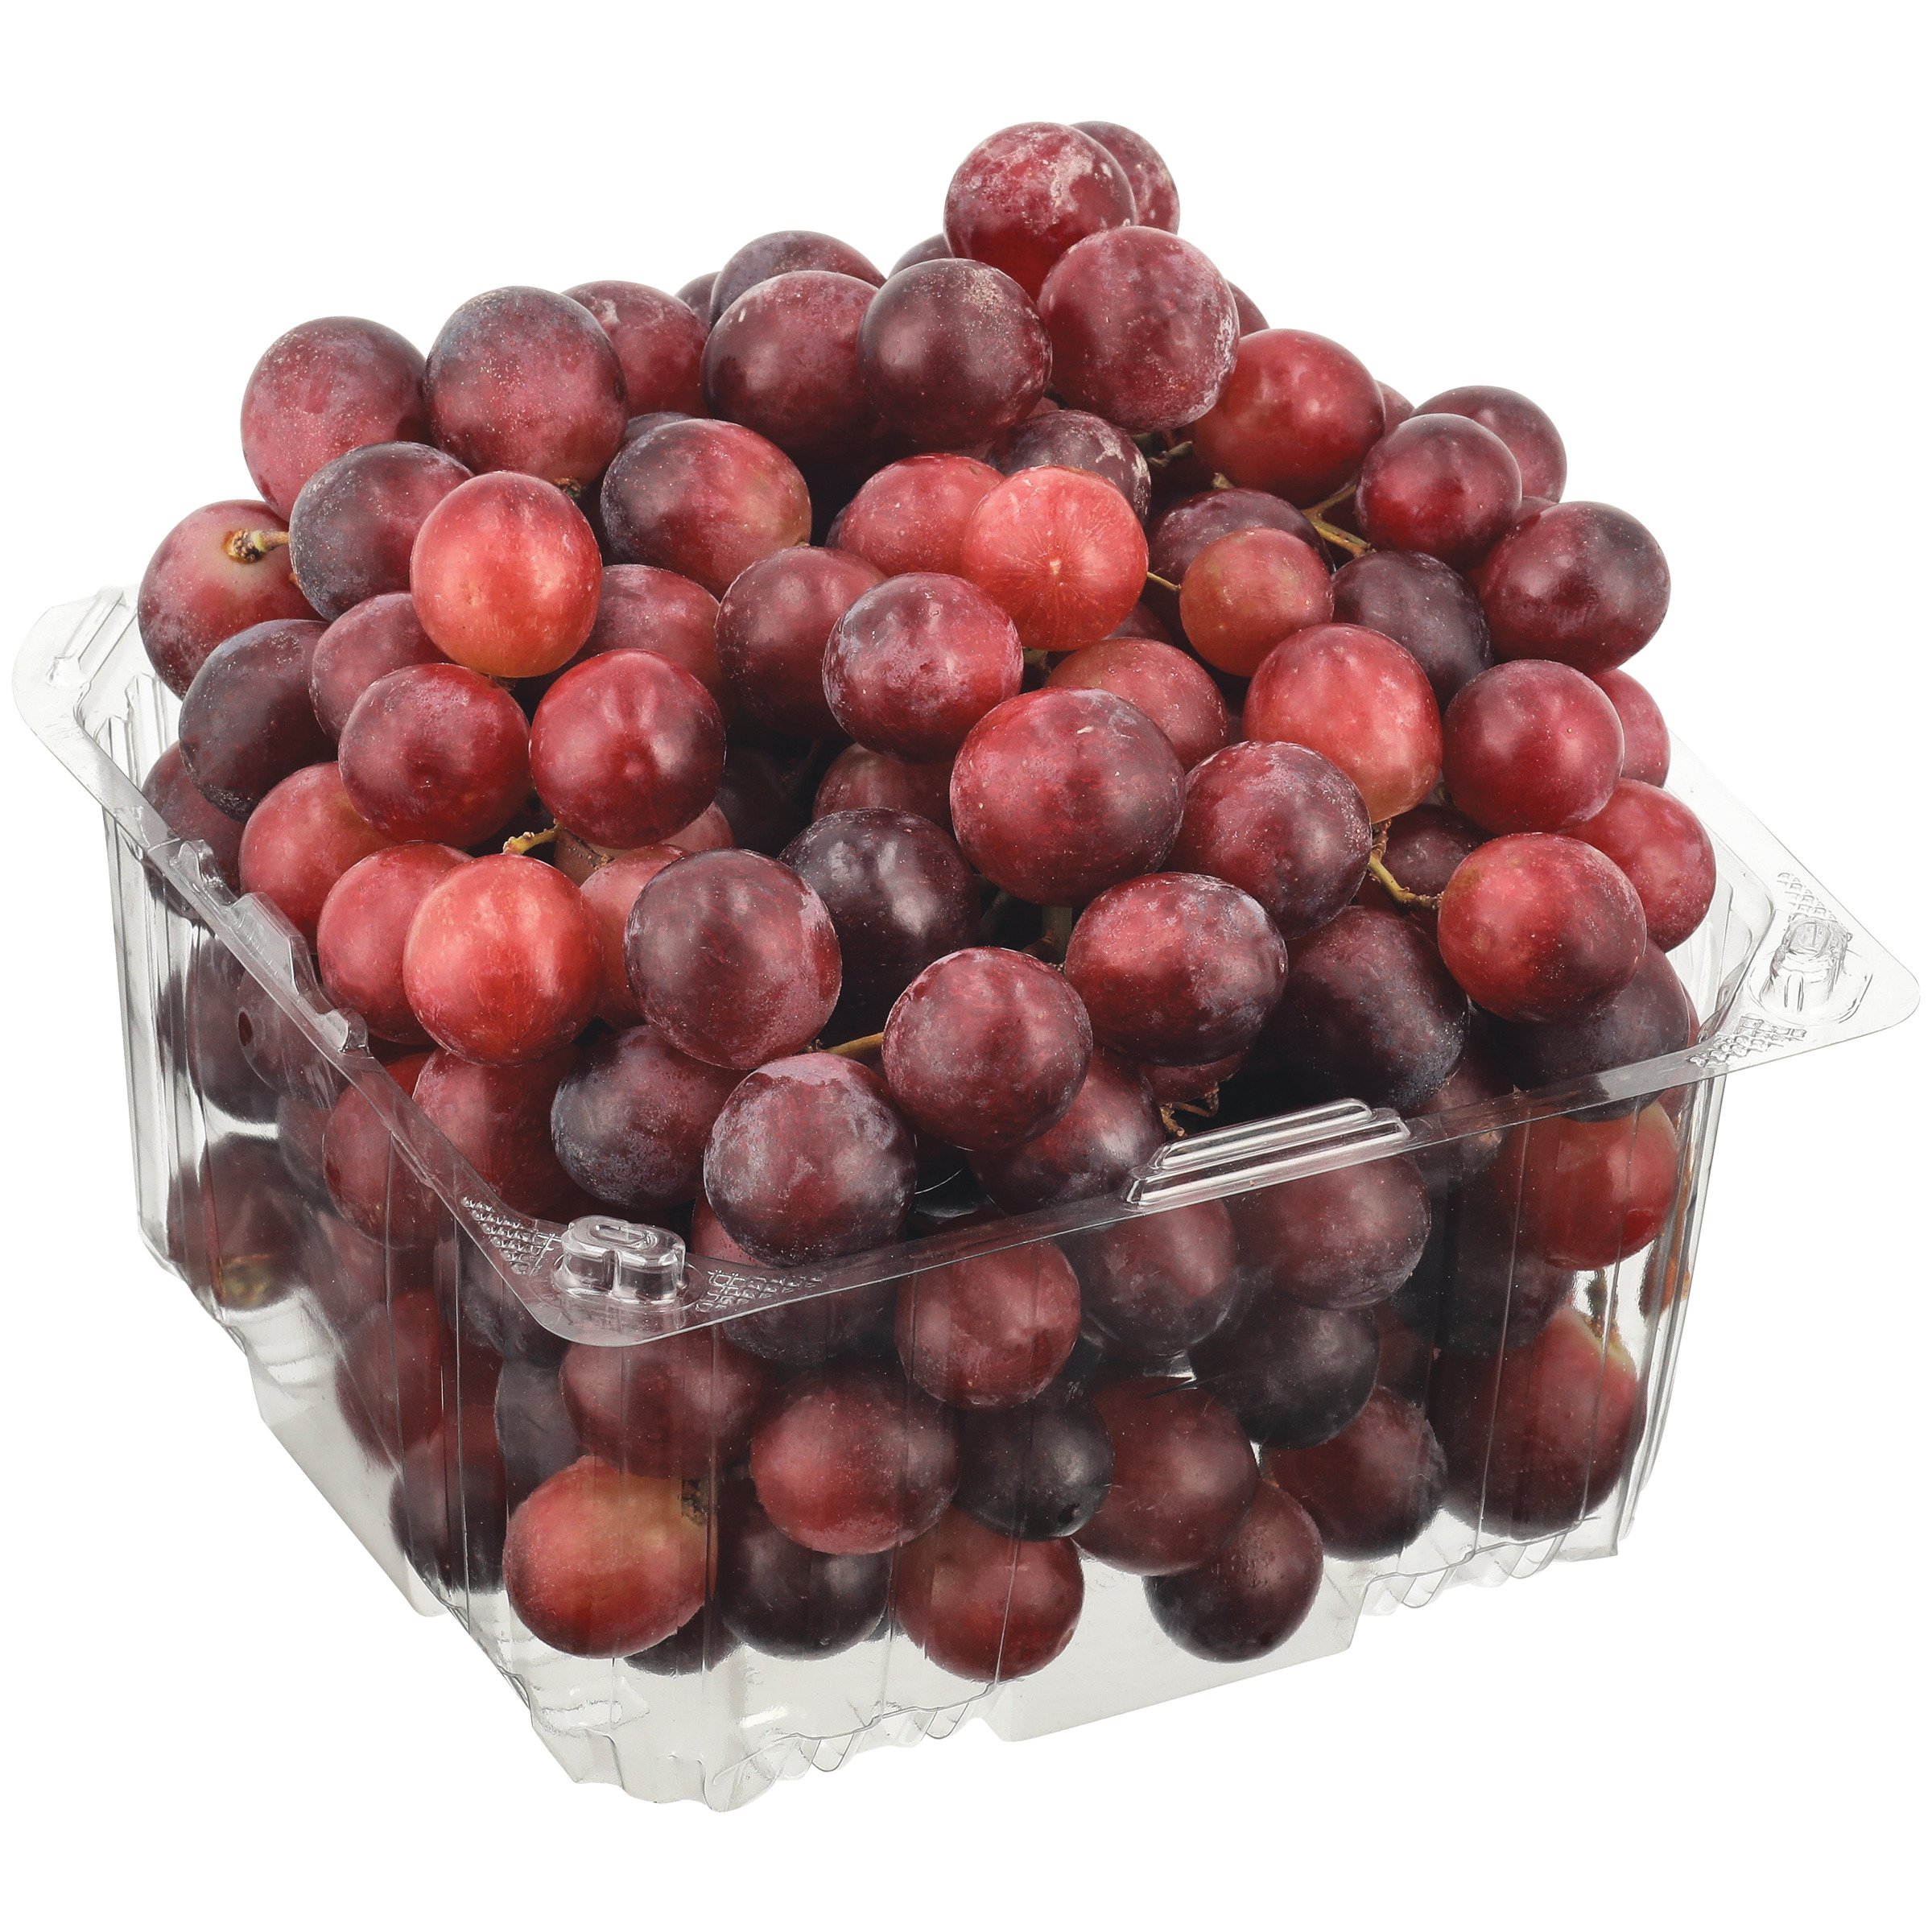 Basket & Bushel Red Seedless Grapes  Hy-Vee Aisles Online Grocery Shopping